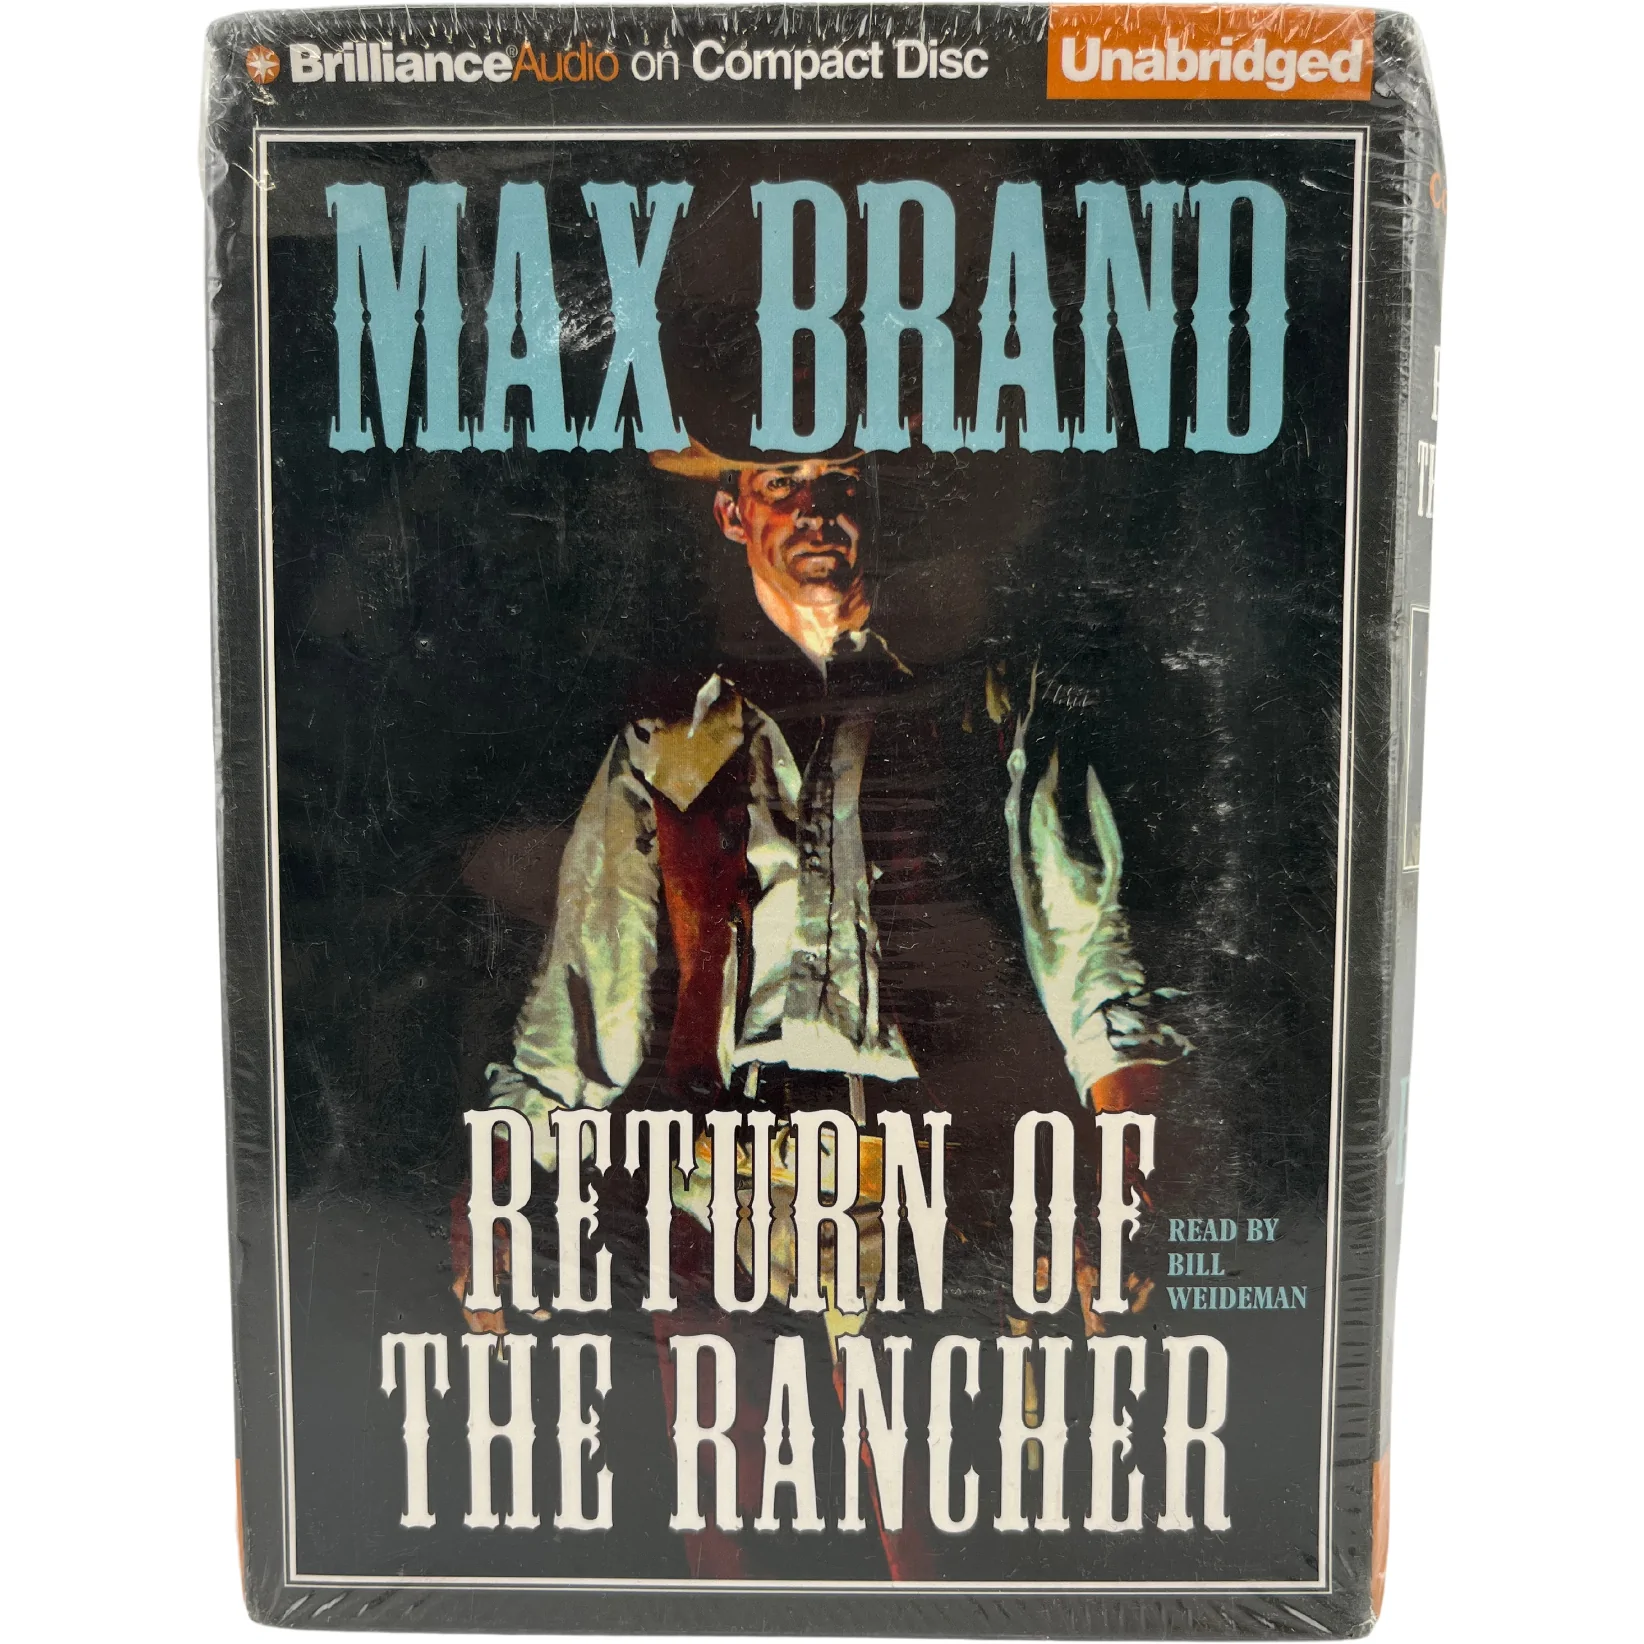 Audiobook "Return Of The Rancher" / Author Max Brand / CD